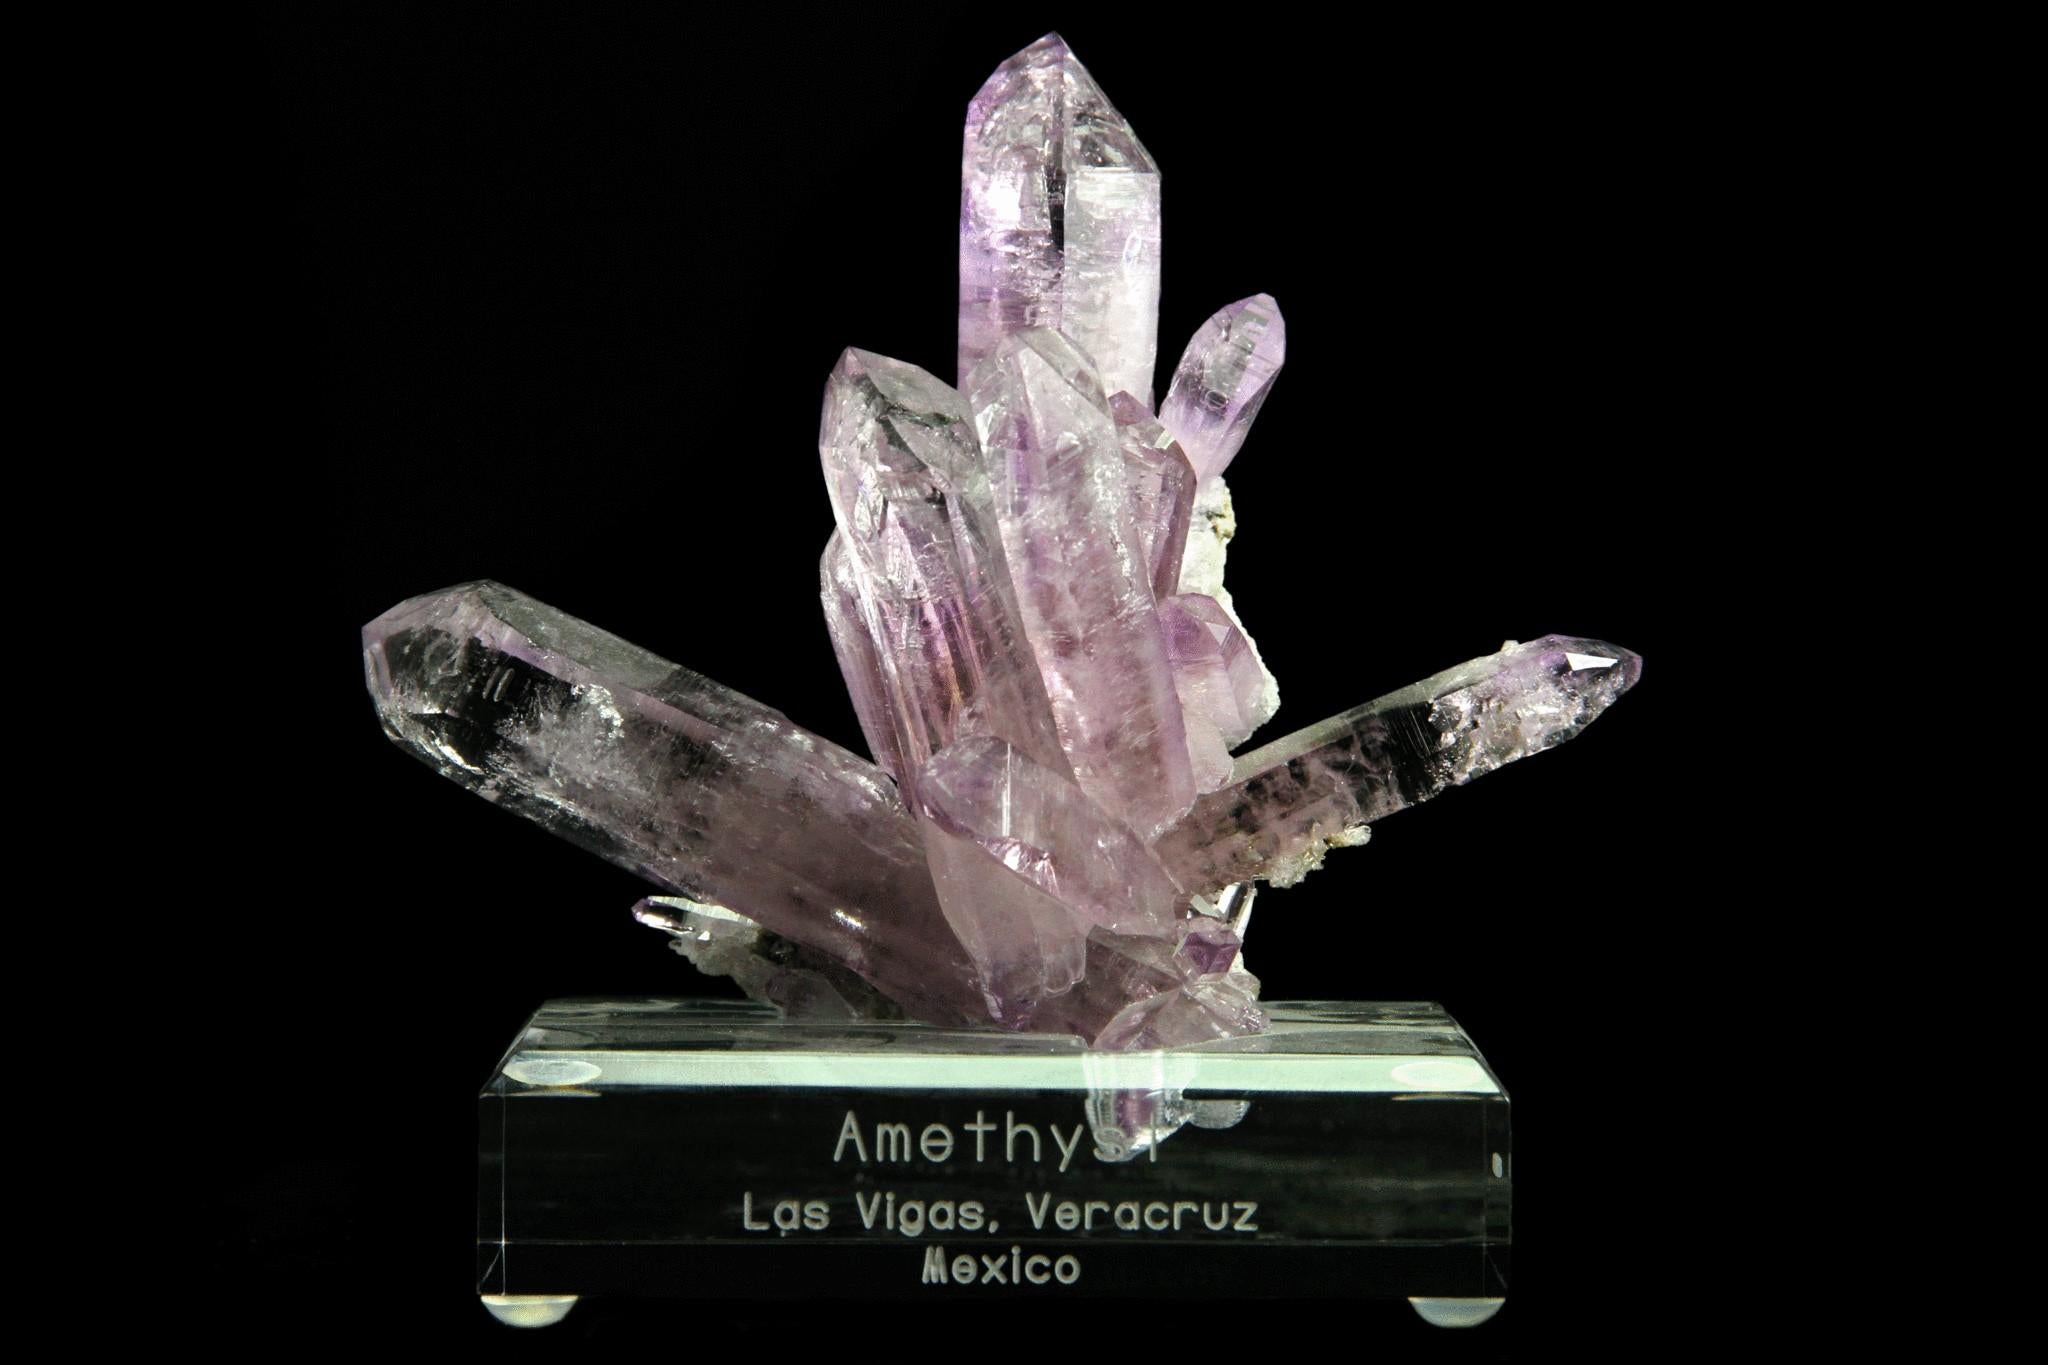 From Piedra Parada, Las Vigas de Ramirez, Veracruz, Mexico

 

Lustrous sharp terminated cluster of Amethyst crystals shooting out in every direction. Has an even medium purple color throughout the crystals with a high glassy luster. Crystals are